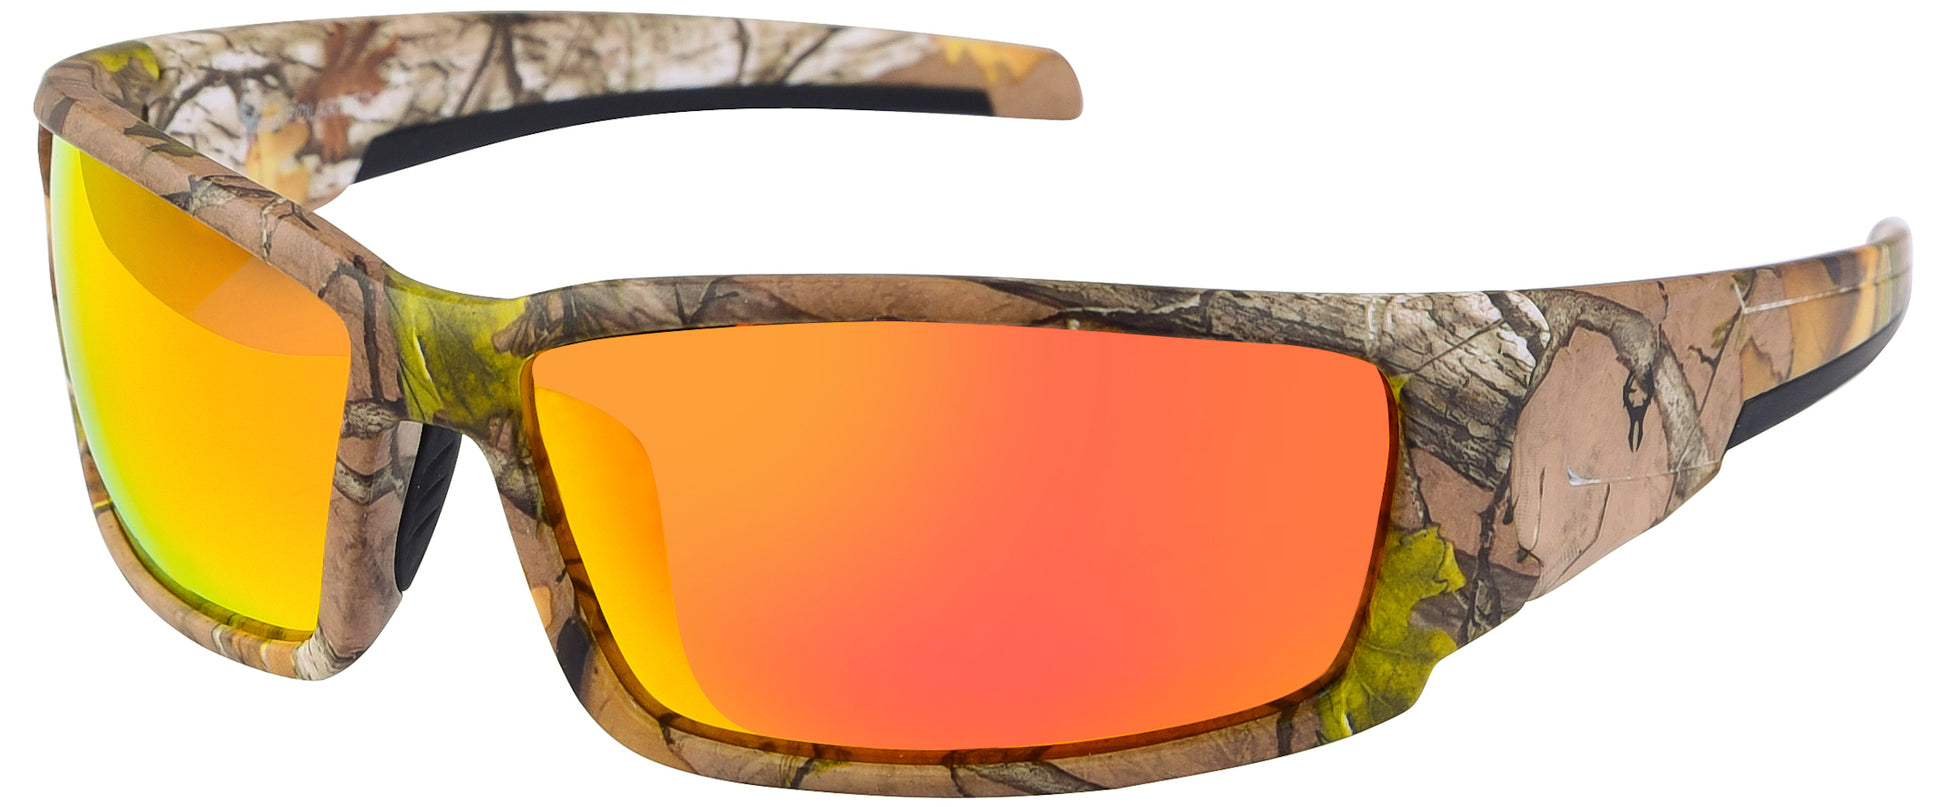 Main image: Hornz Brown Forest Camouflage Polarized Sunglasses for Men - Aquabull - Free Matching Microfiber Pouch - Brown Camo Frame - Fire Orange Lens